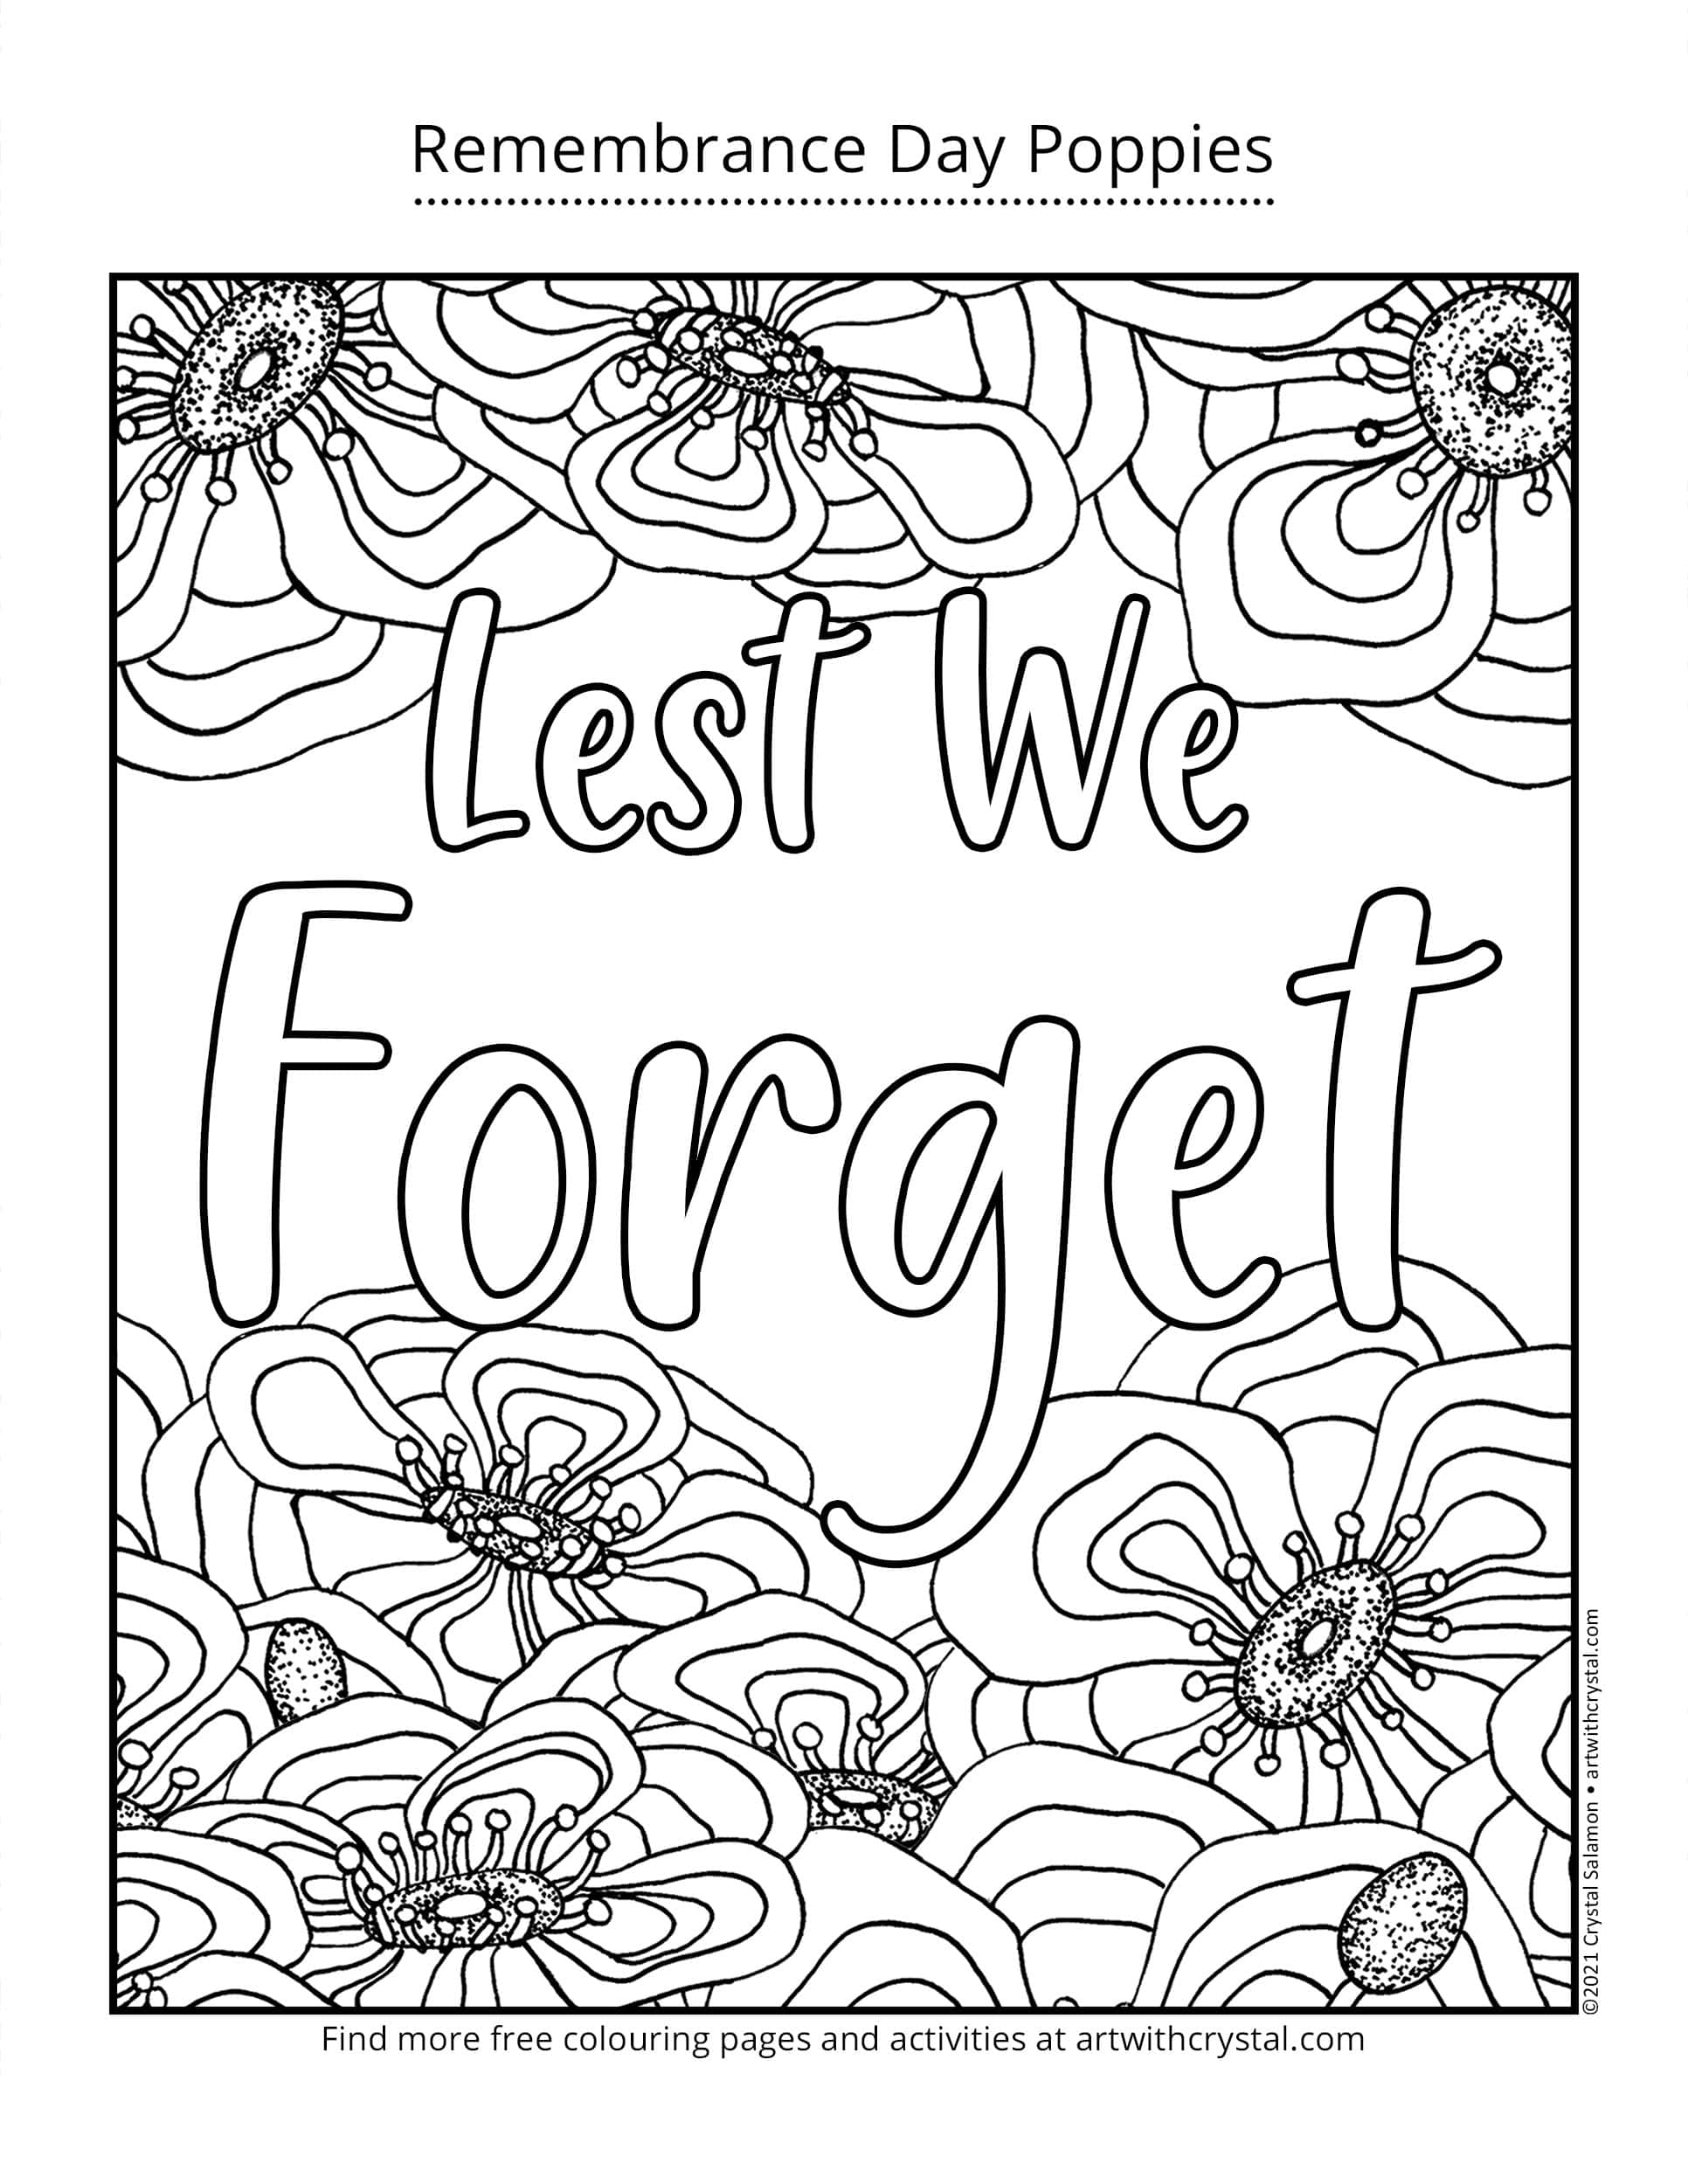 Remembrance Day Poppies - Lest We Forget - FREE Printable - Art With Crystal